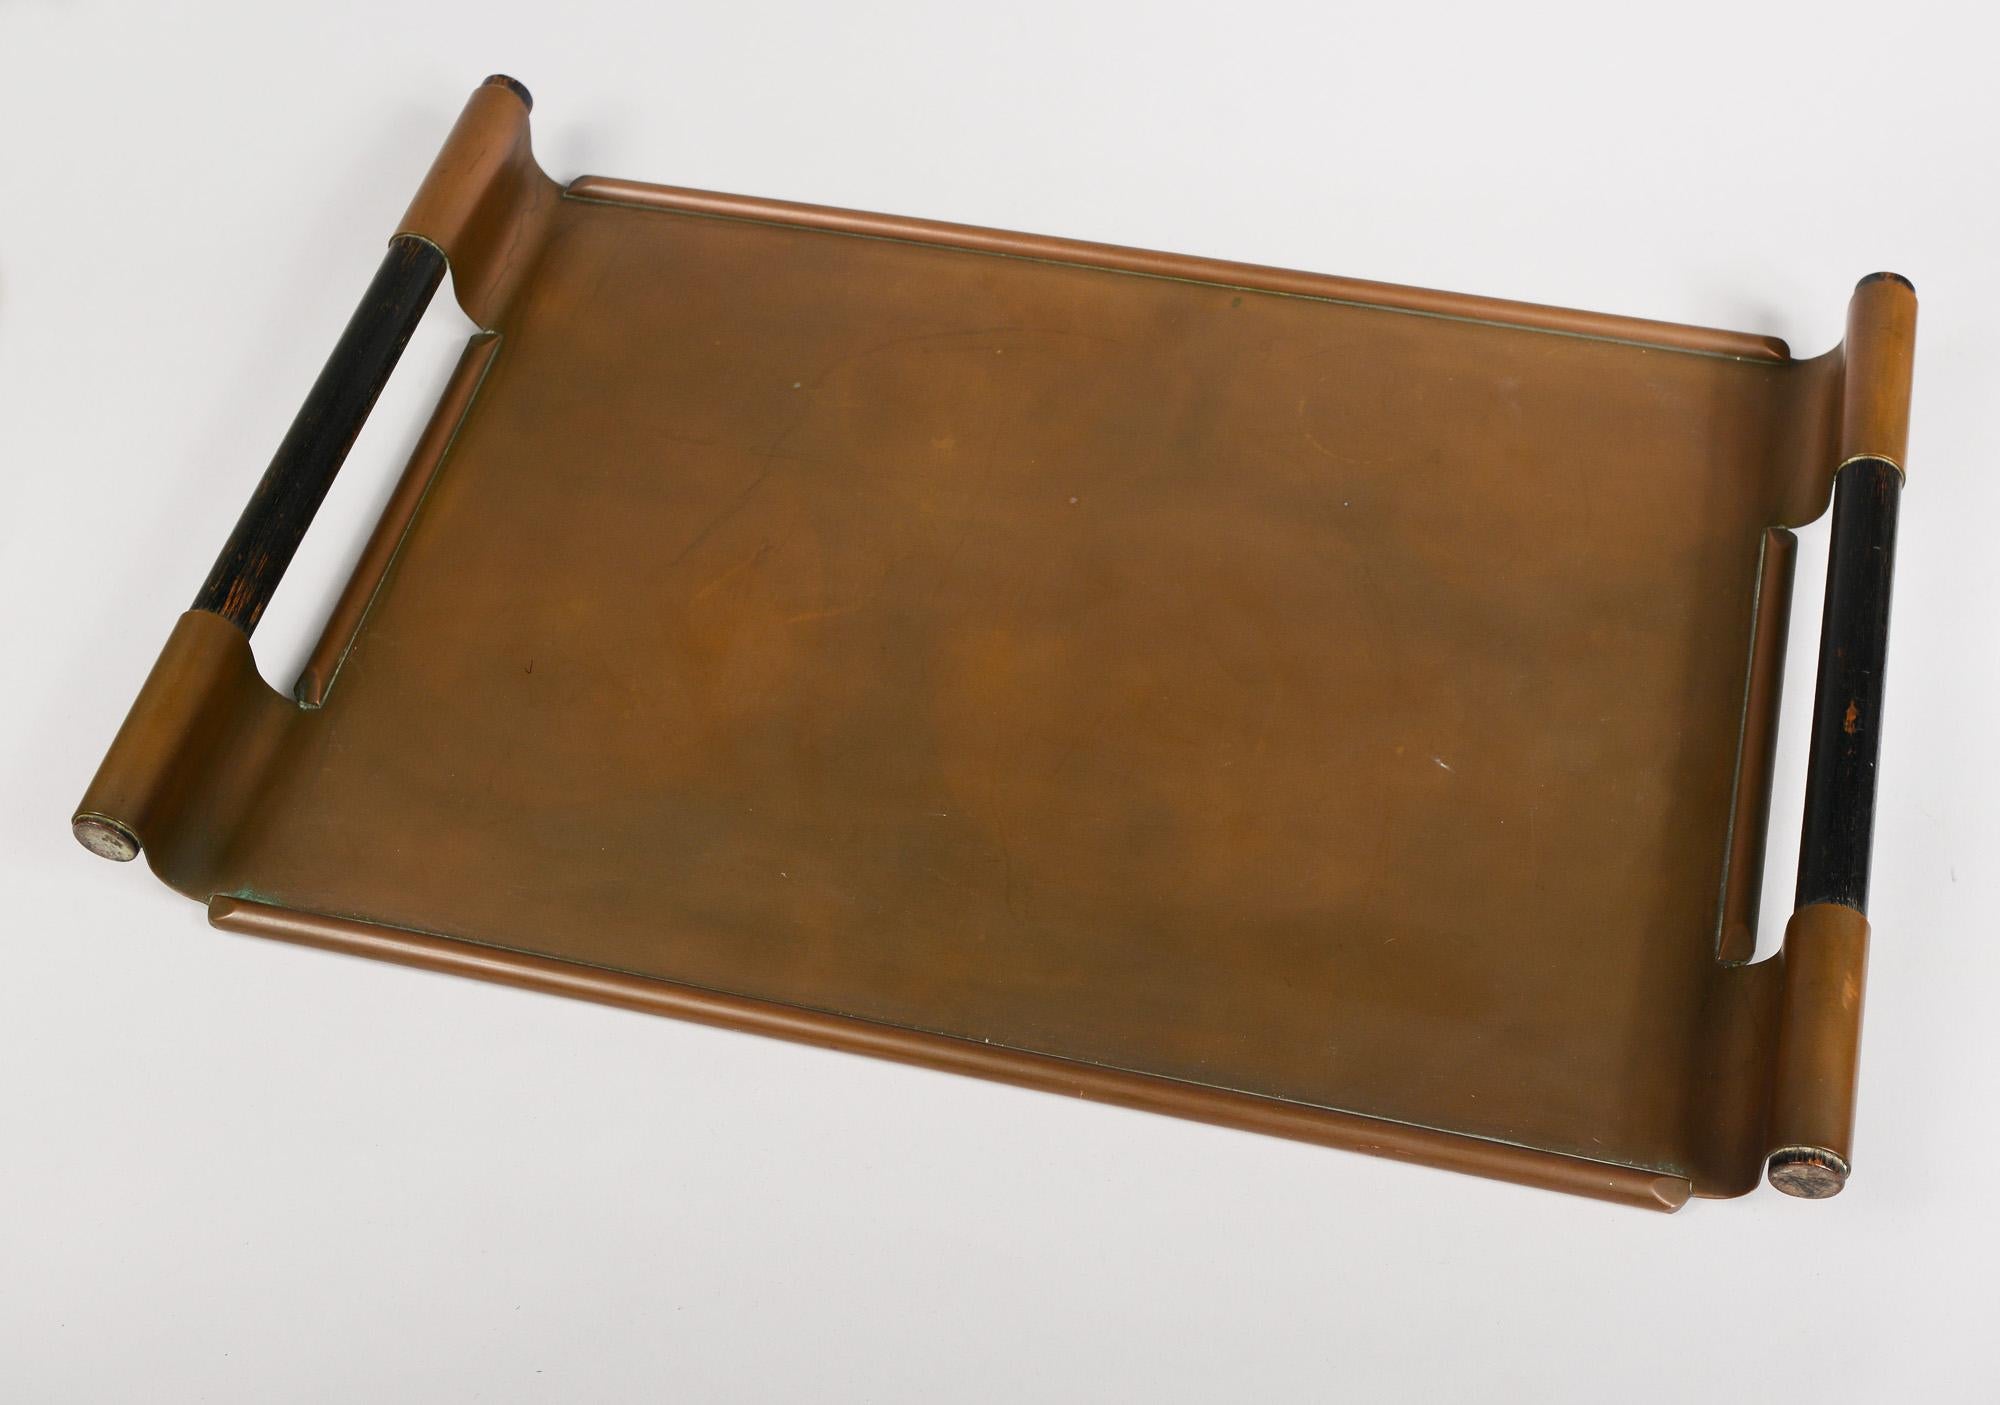 Chase Tiffin tray in copper designed by Walter Von Nessen. This tray is in original condition. It shows normal wear. There is some paint loss on the wood handles. One side of one handle appears to be bent in slightly towards the tray. This tray is